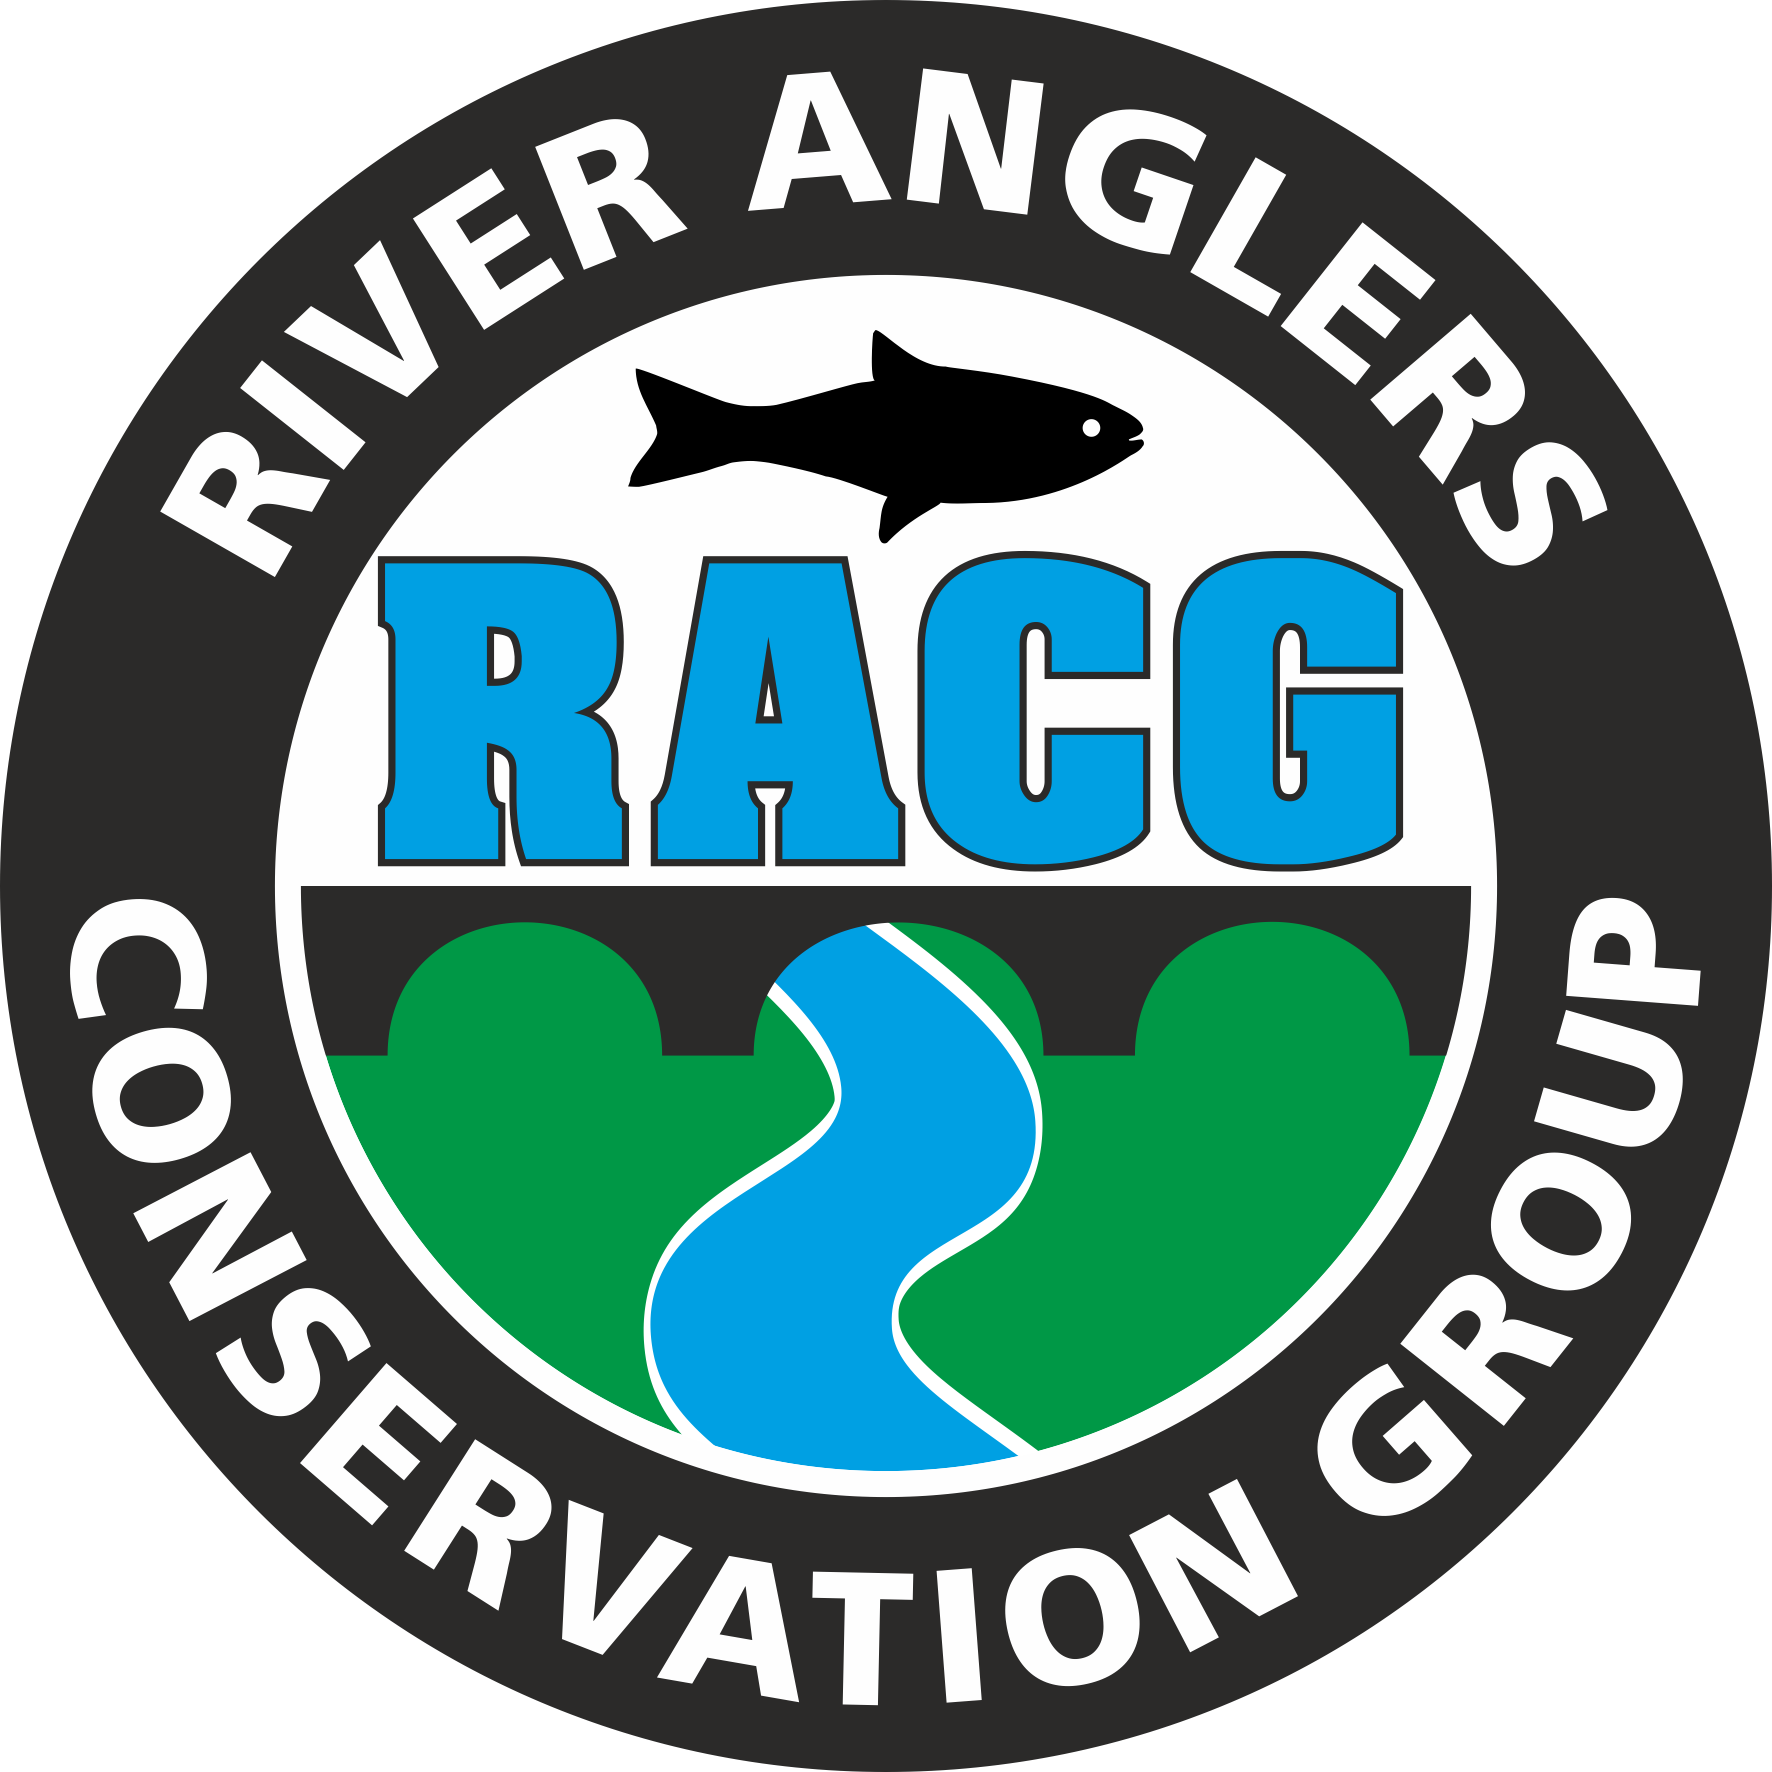 River Anglers Conservation Group – For the future of river angling